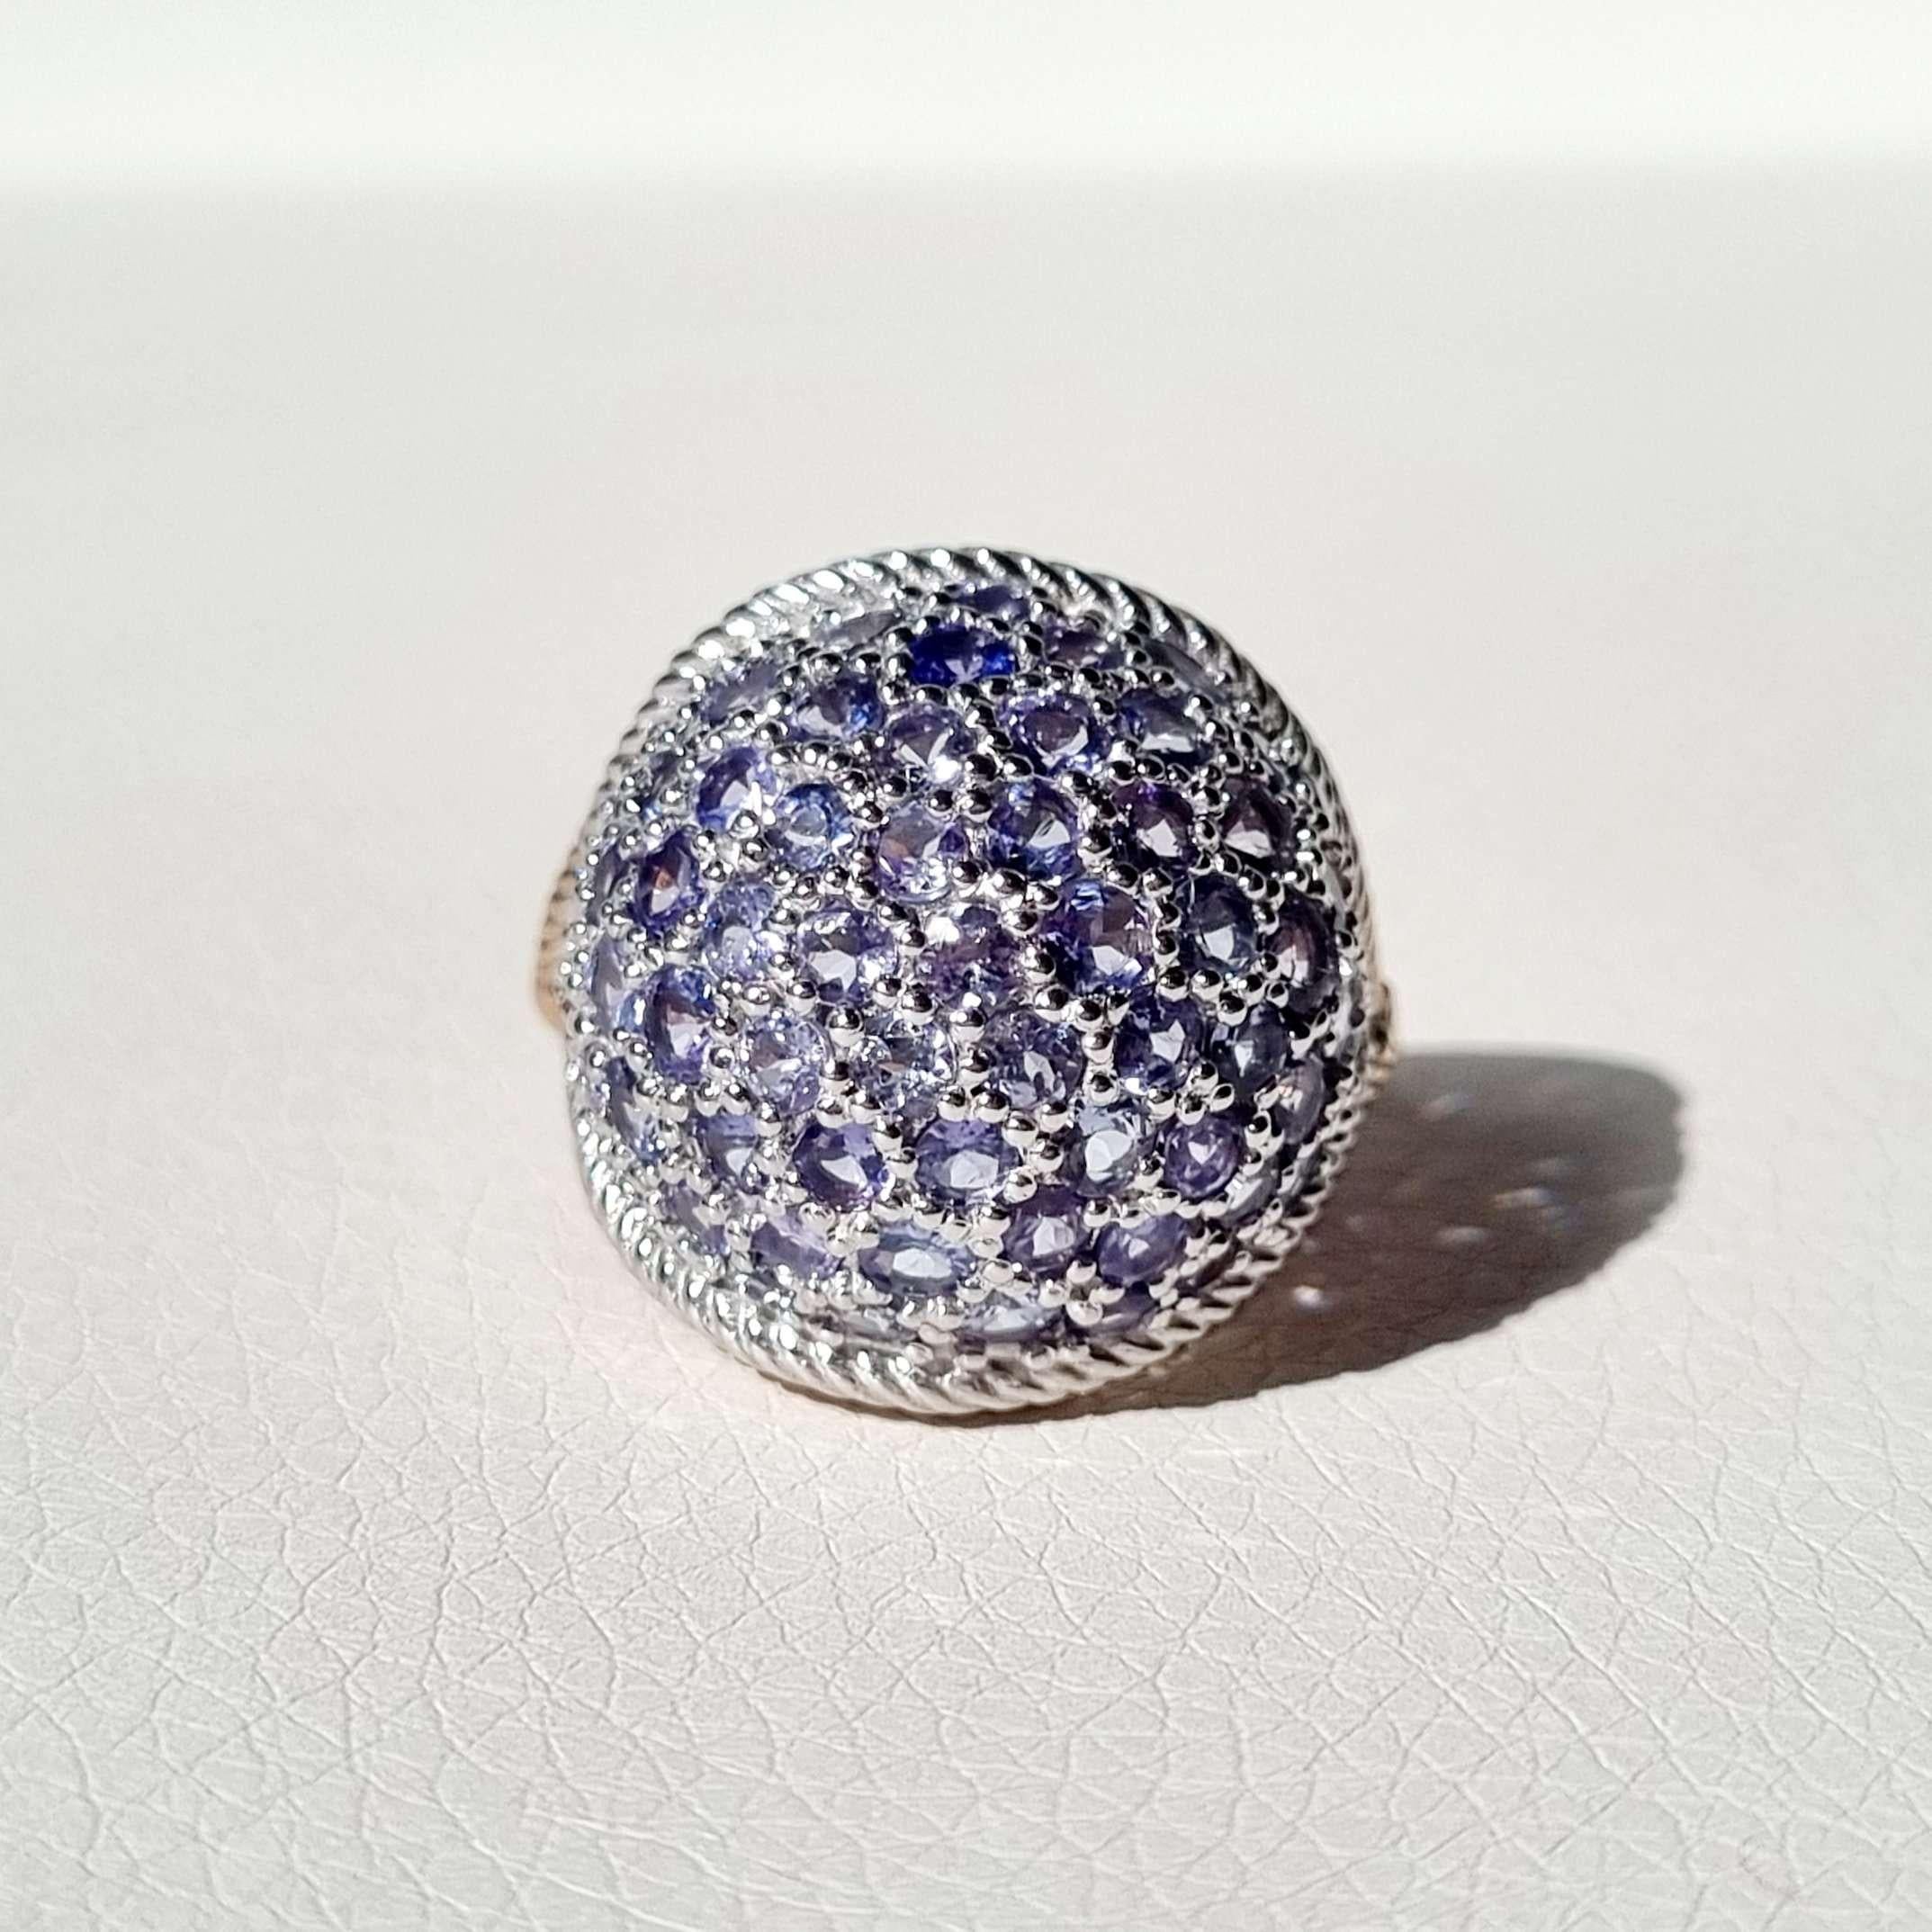 A gorgeous dome statement ring made of 448 ct natural tanzanite. This piece is a show-stopper and a topic it self.

Total weight: 11.8 gr
Material: 14k solid white and rose gold, can also be ordered in yellow, white and rose (made to order)

Main